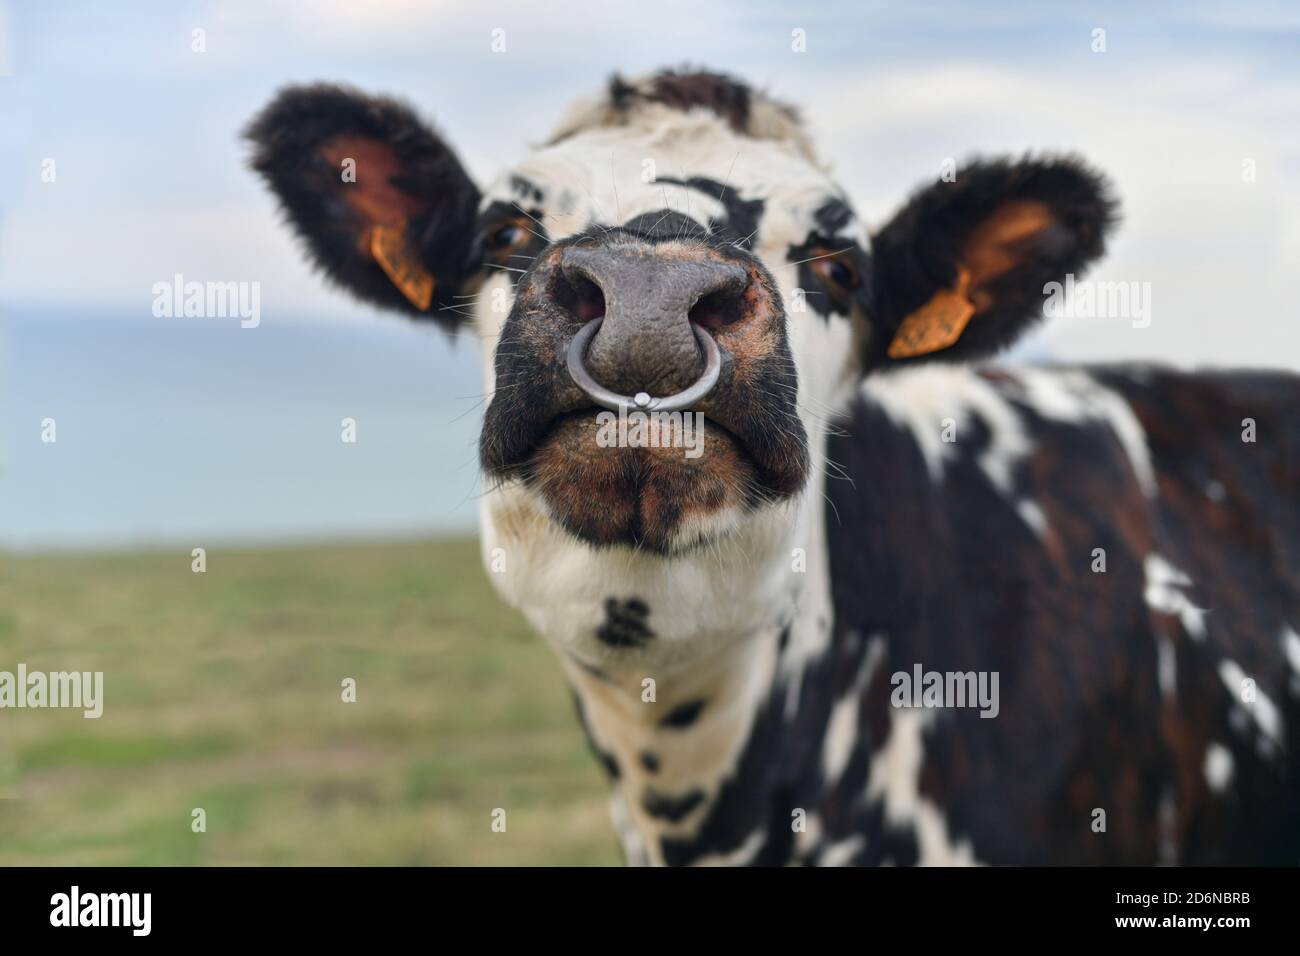 Spotted cow with a pierced nose in Normandy Stock Photo